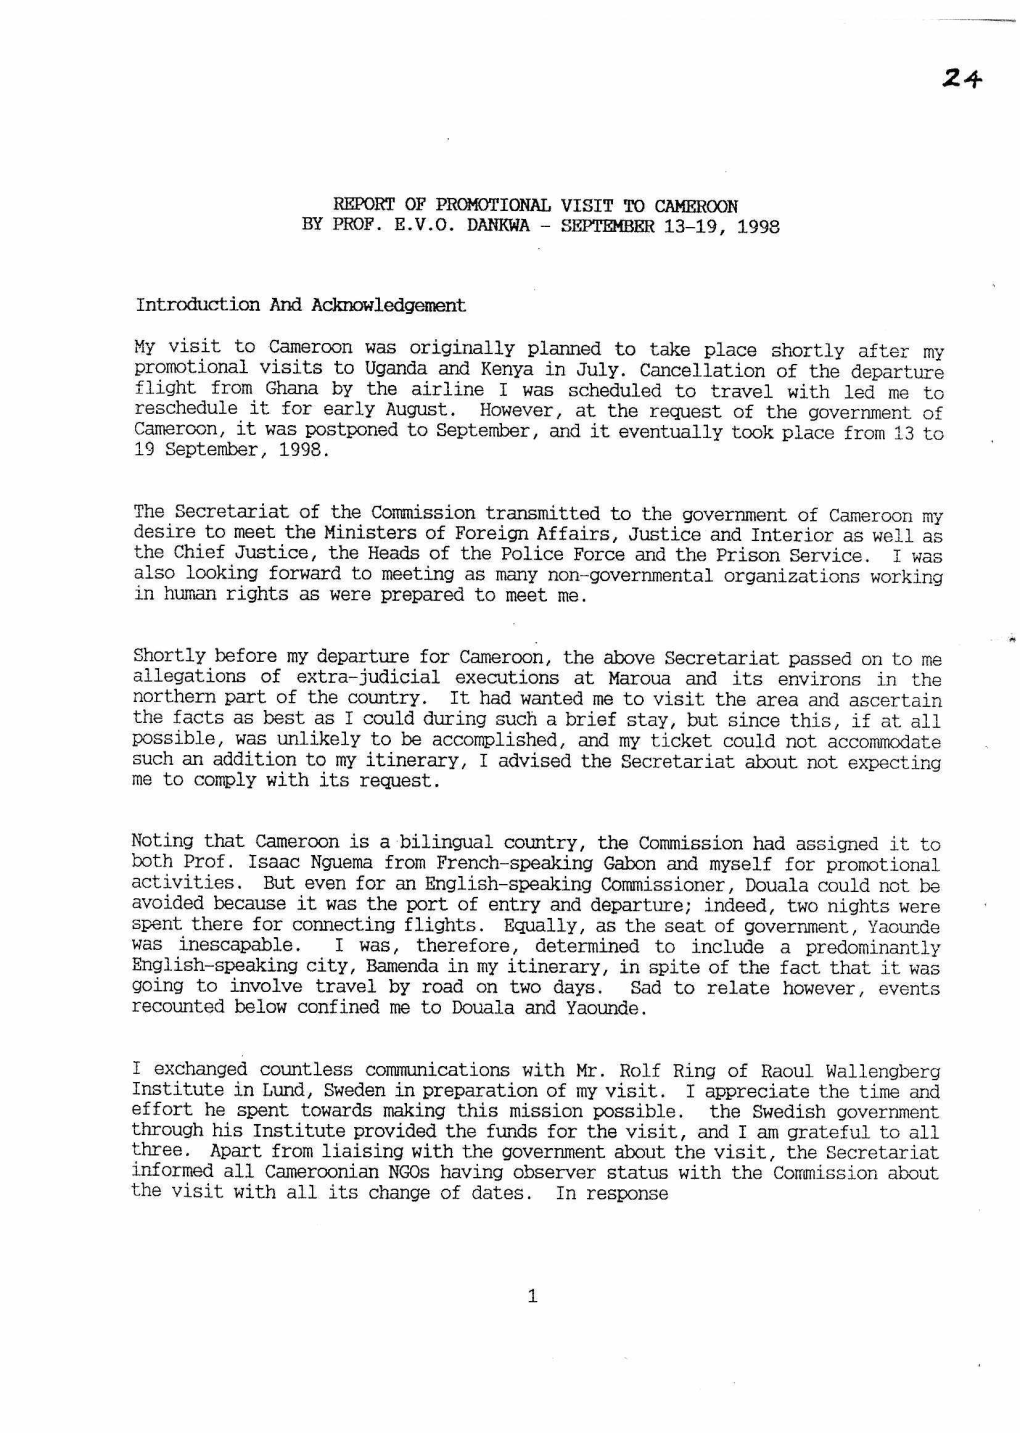 Report of Promotional Visit to Cameroon by Prof. E.V.O. Dankwa - September 13-19, 1998